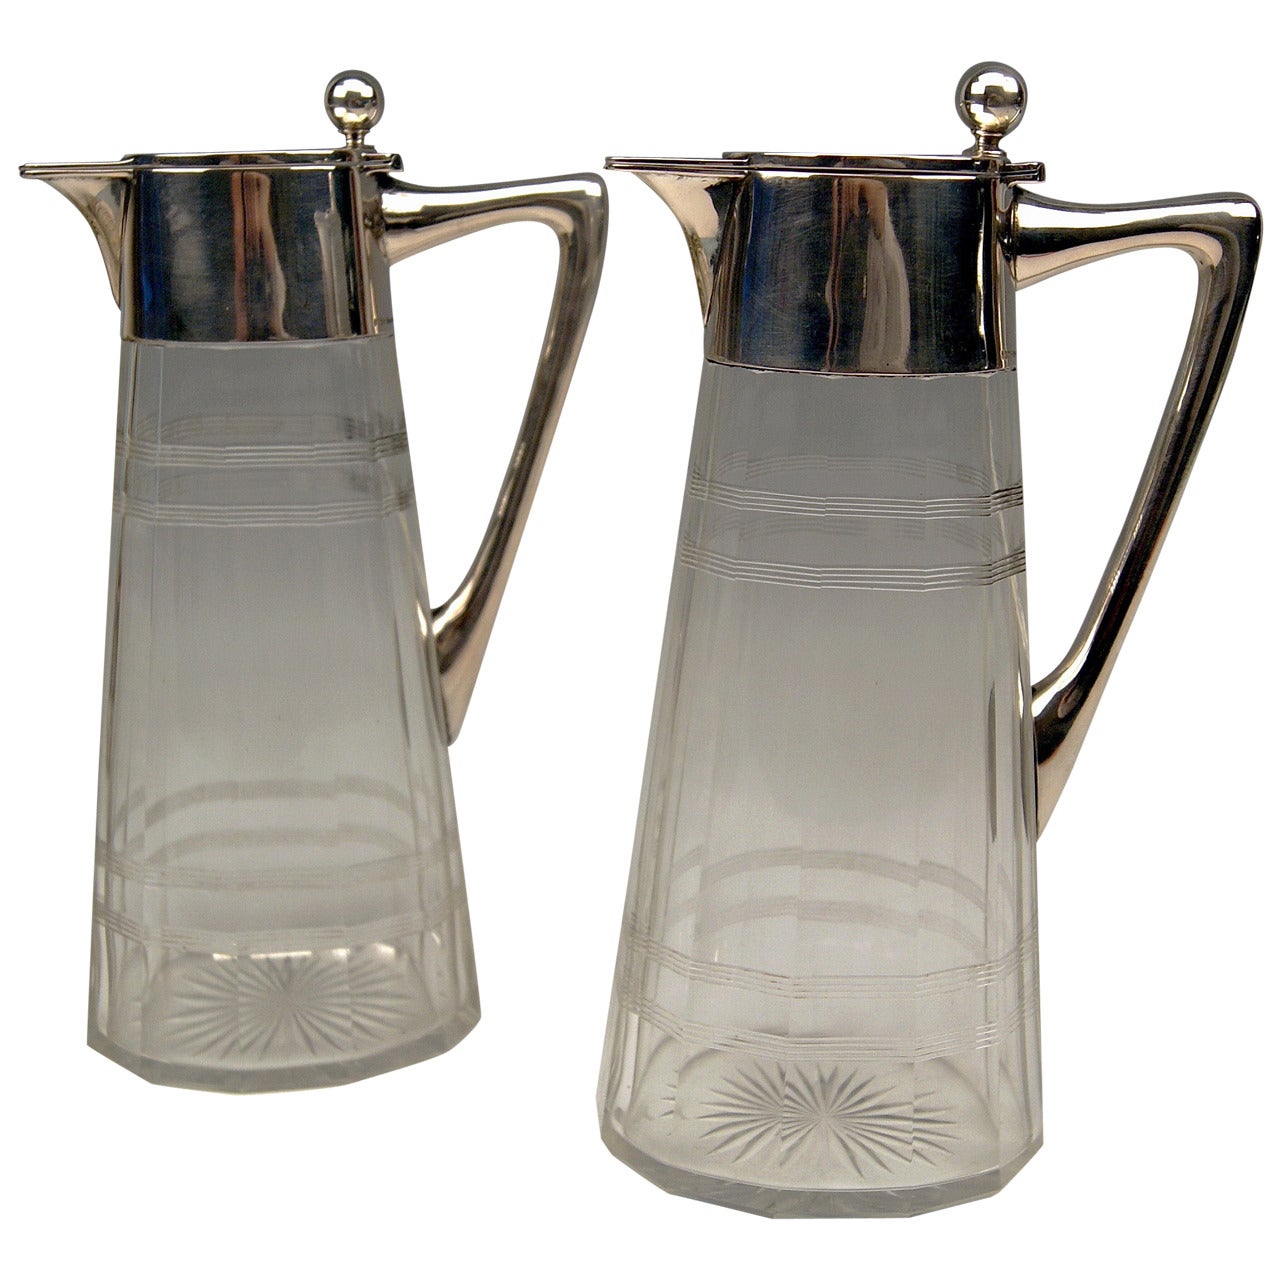 Silver Art Nouveau German Pair of Glass Decanters by Wilhelm Binder, 1900